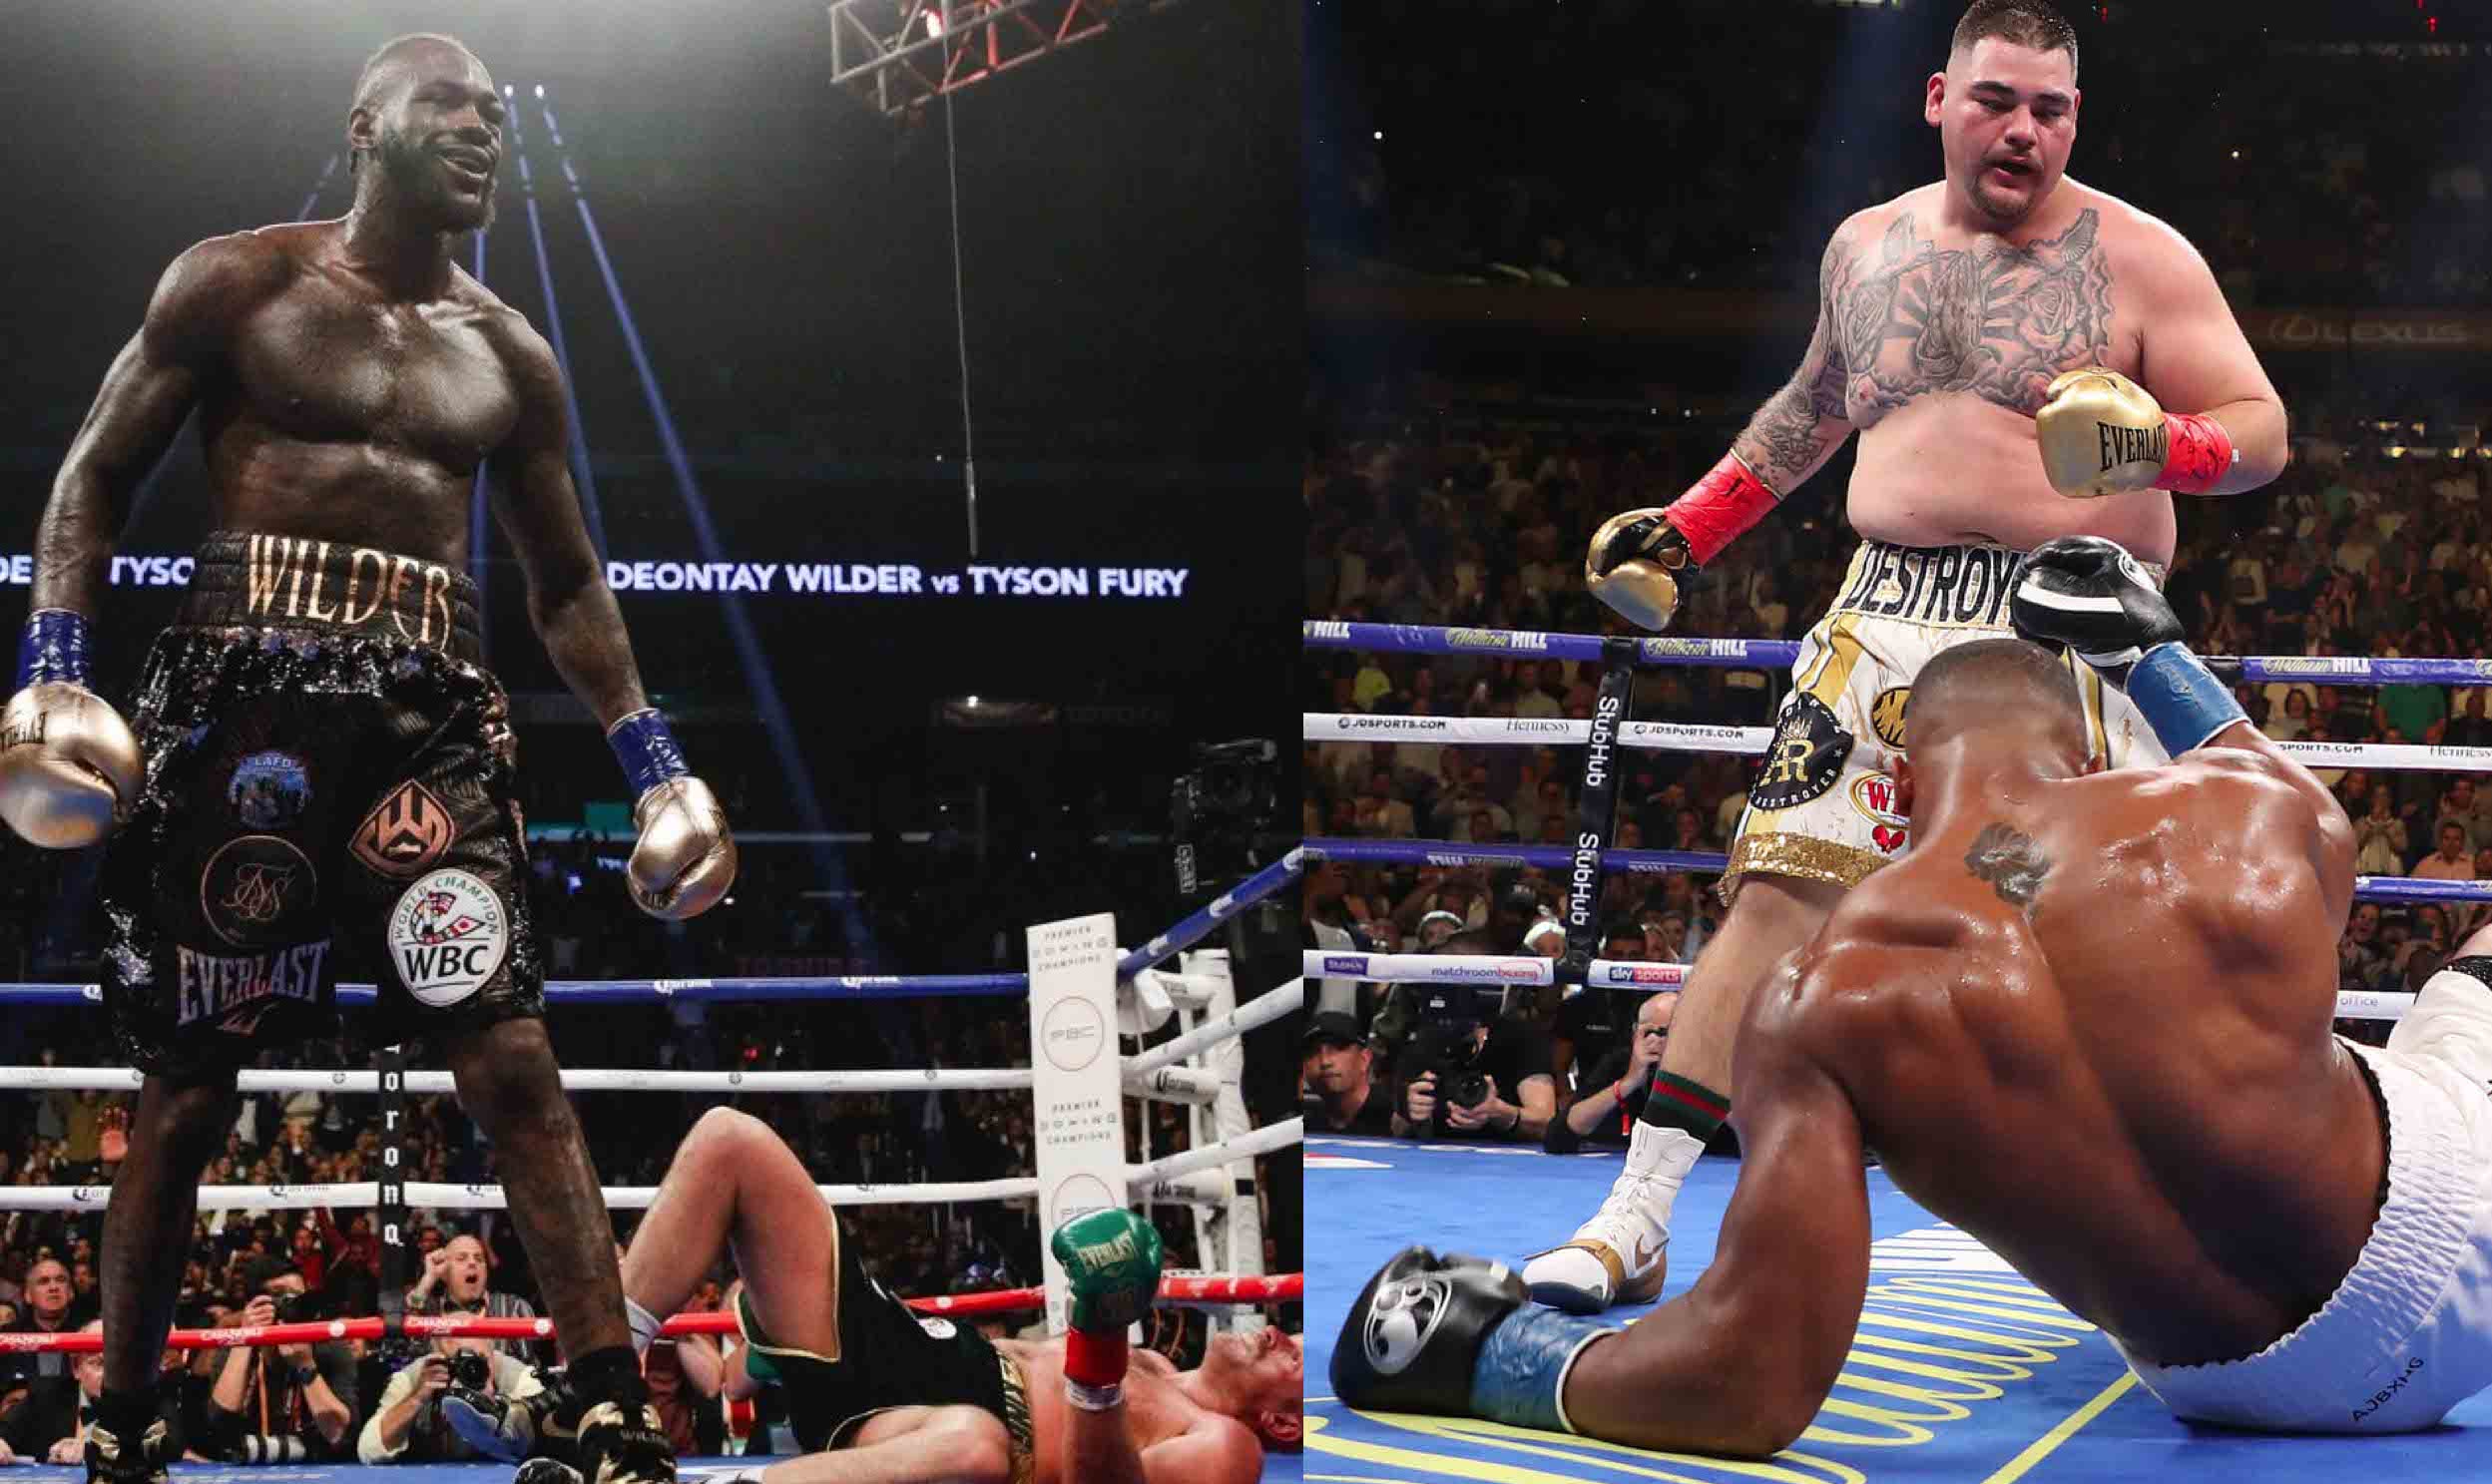 Deontay Wilder v Andy Ruiz Jr. heavyweight superfight may be on the cards